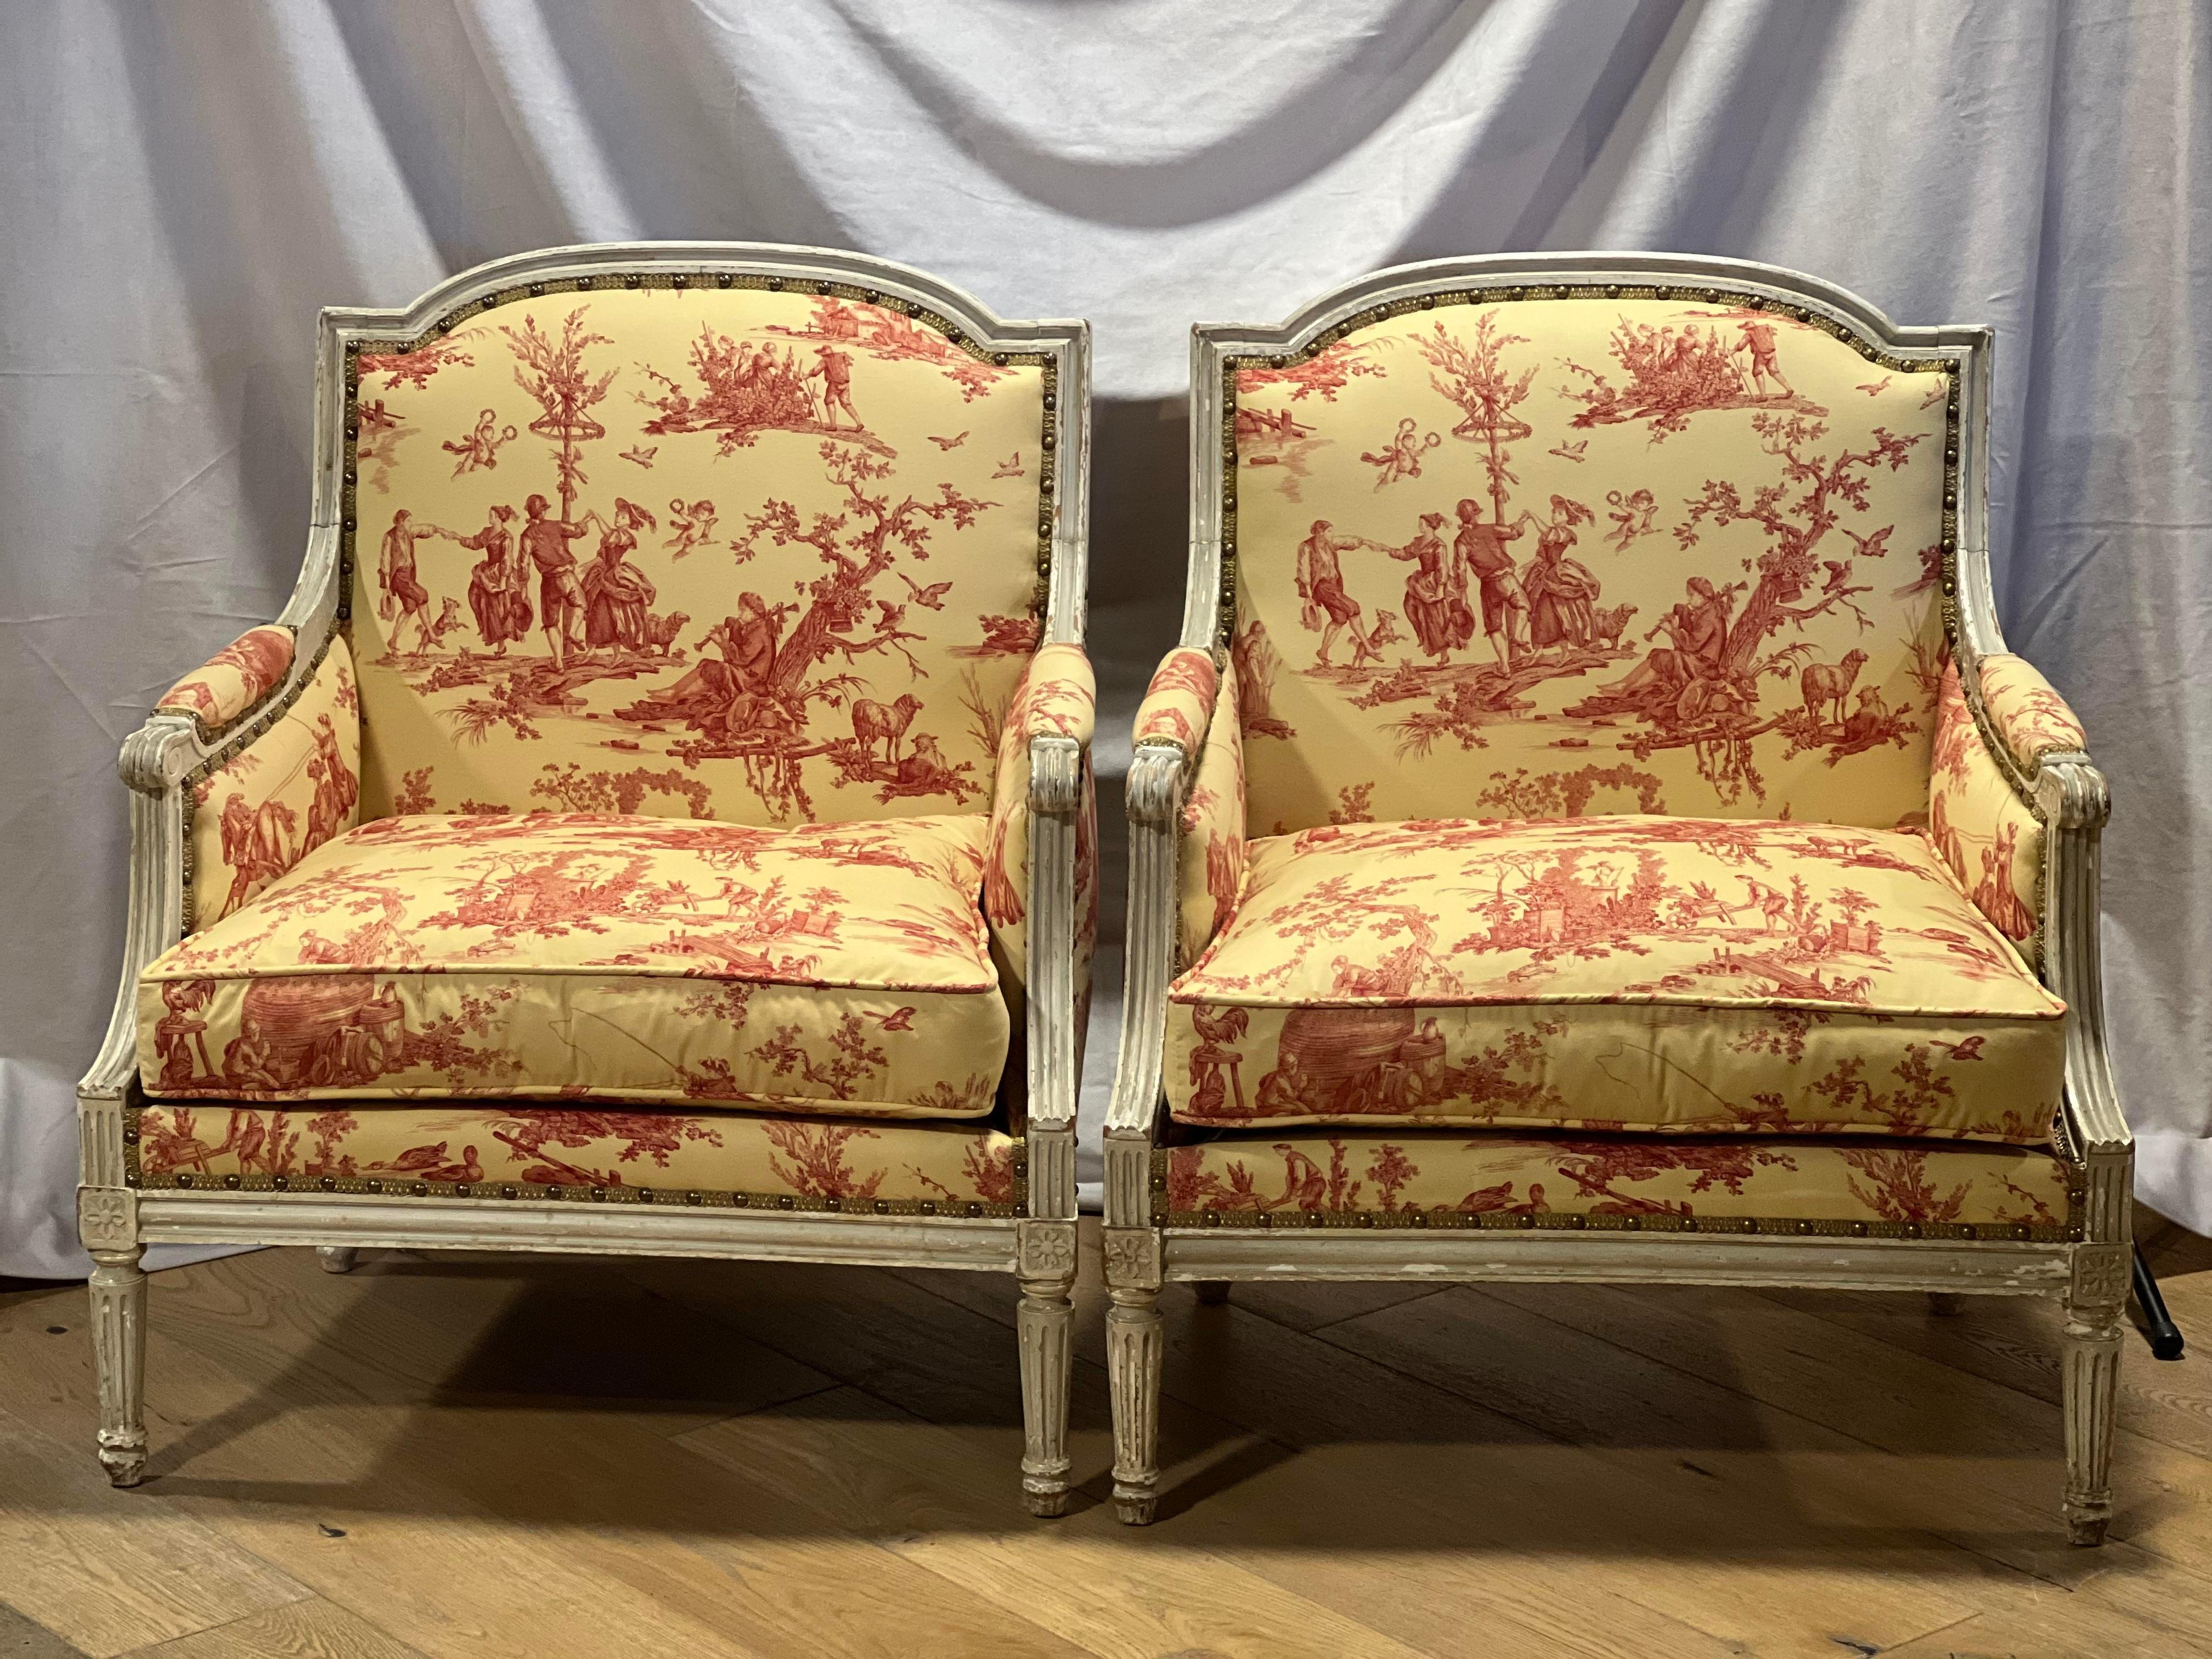 Pair of Late 19th Century  Louis XVI Style French Marquise Chairs.  Original white lacquer paint.  The chairs have new filler as well as a new fabric.